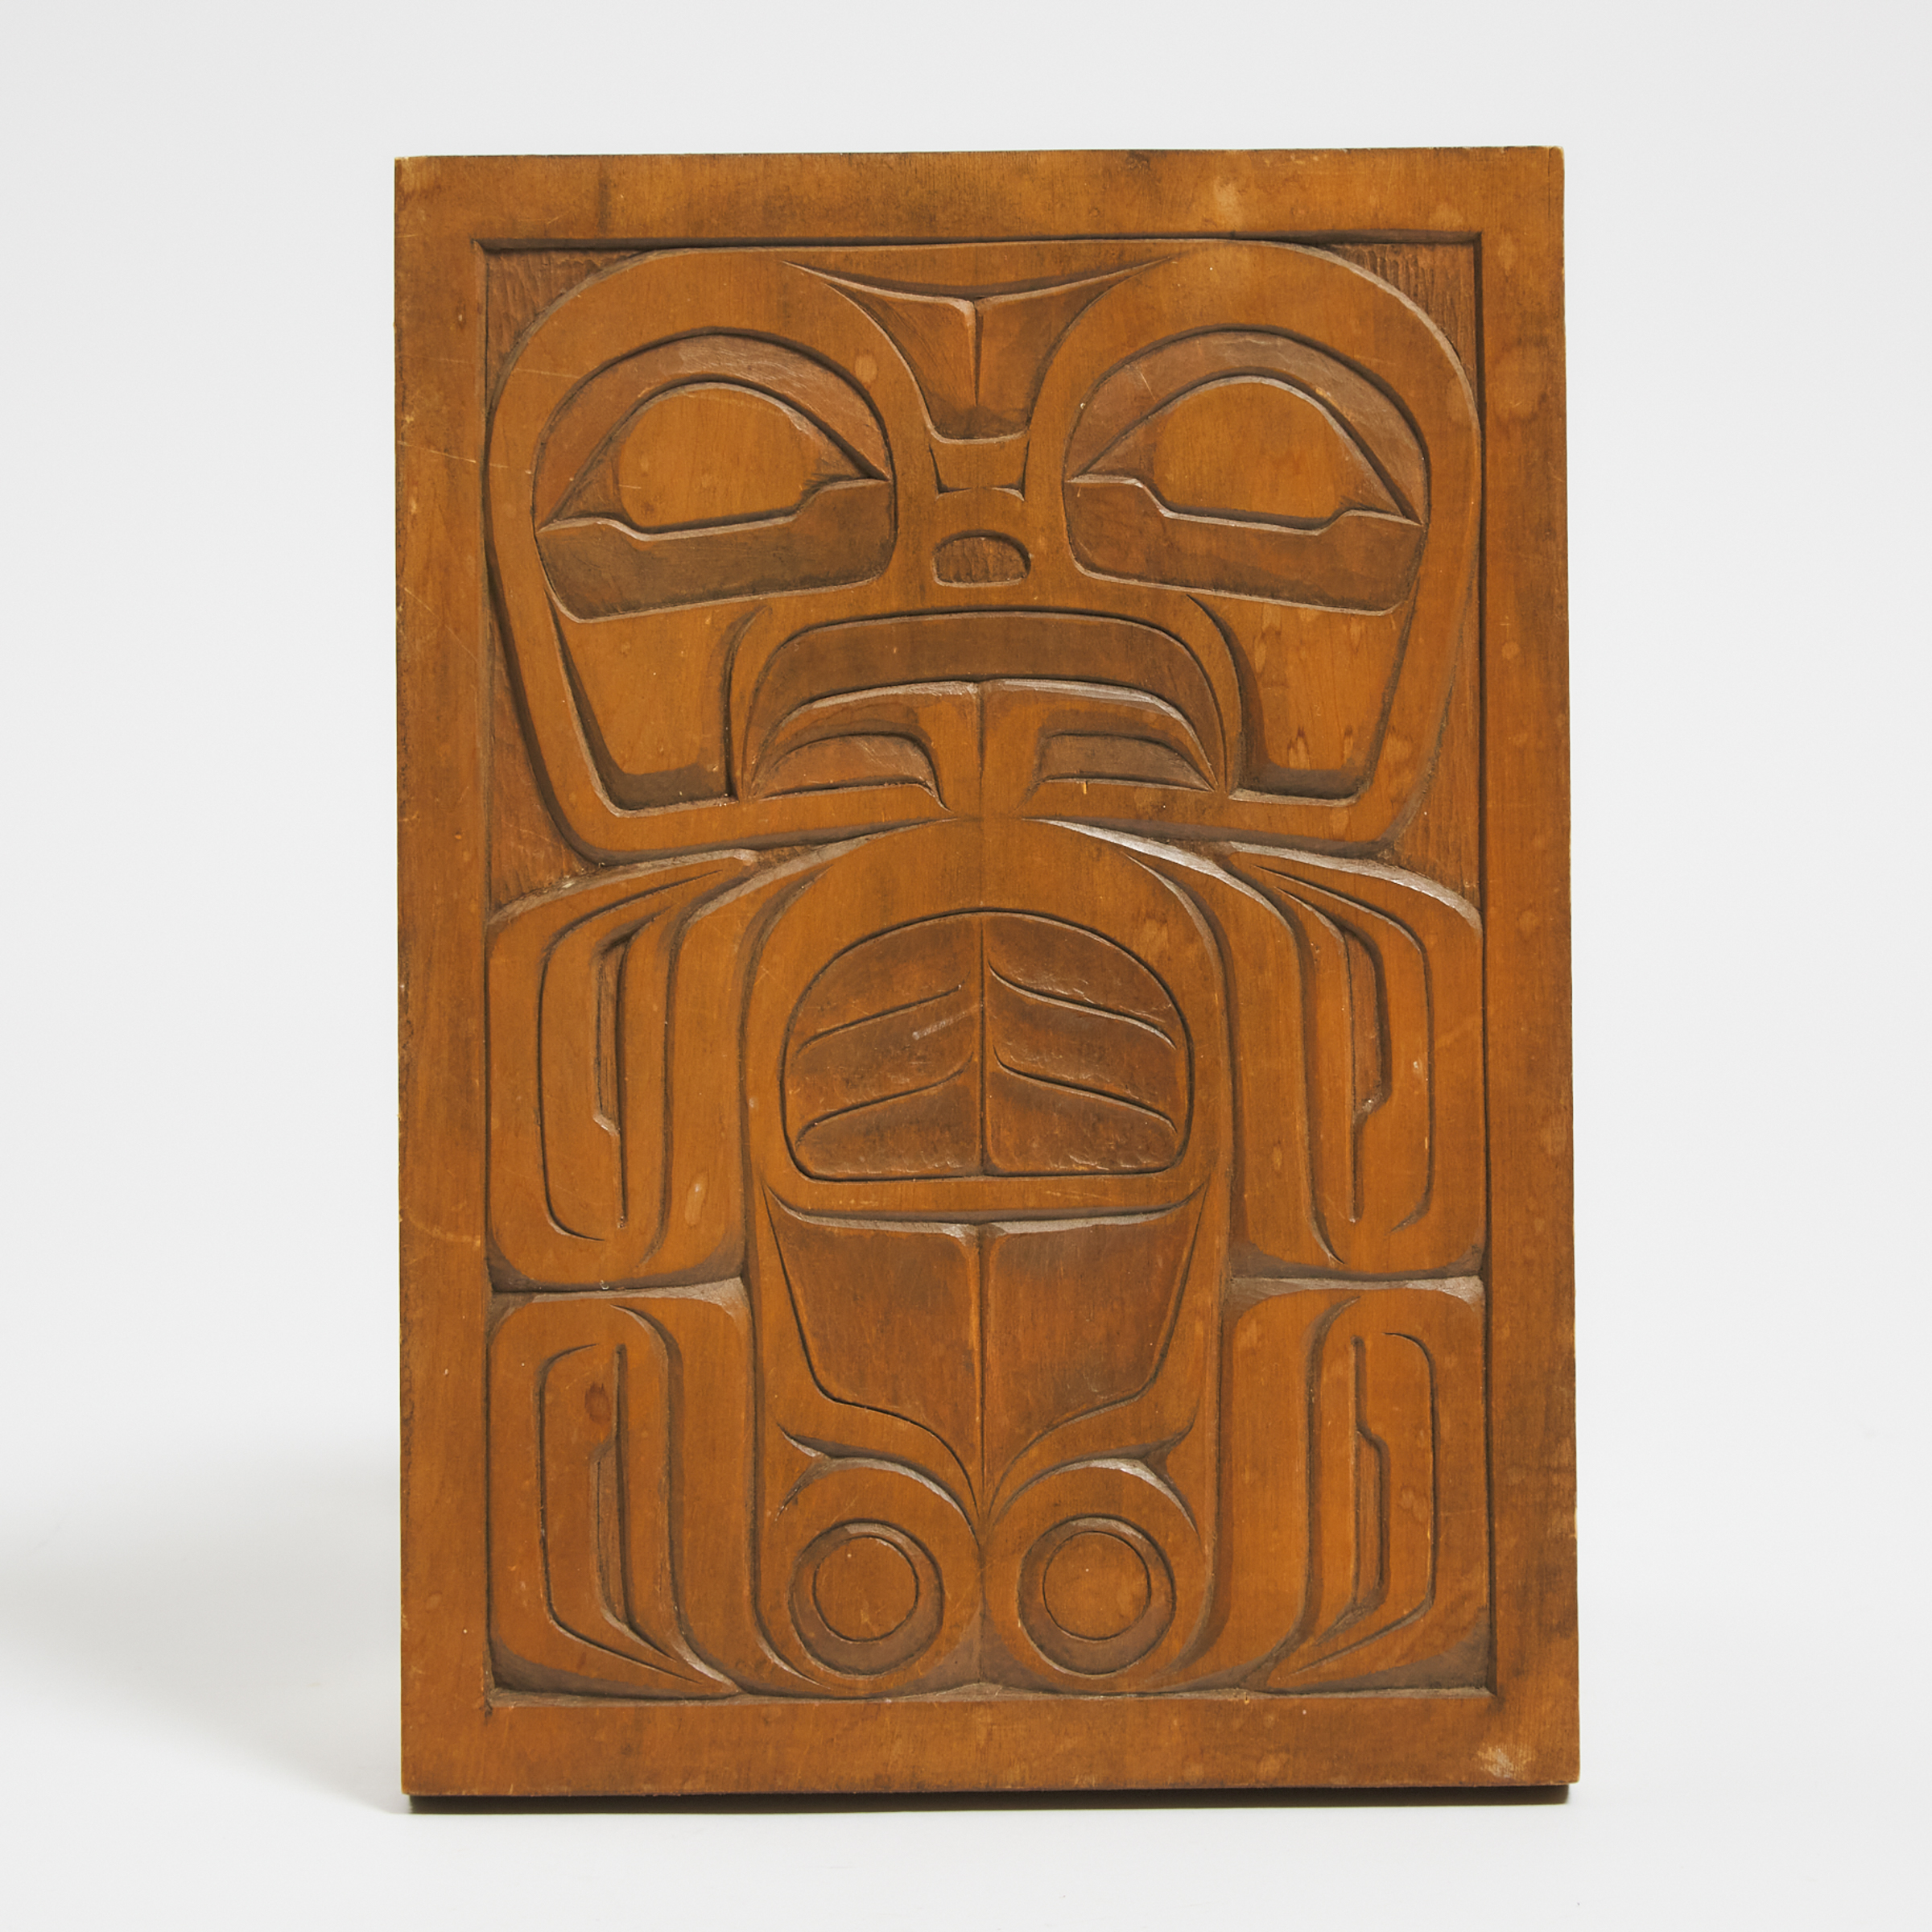 Haida Relief Carved Cedar Wall Plaque by TW, late 20th century